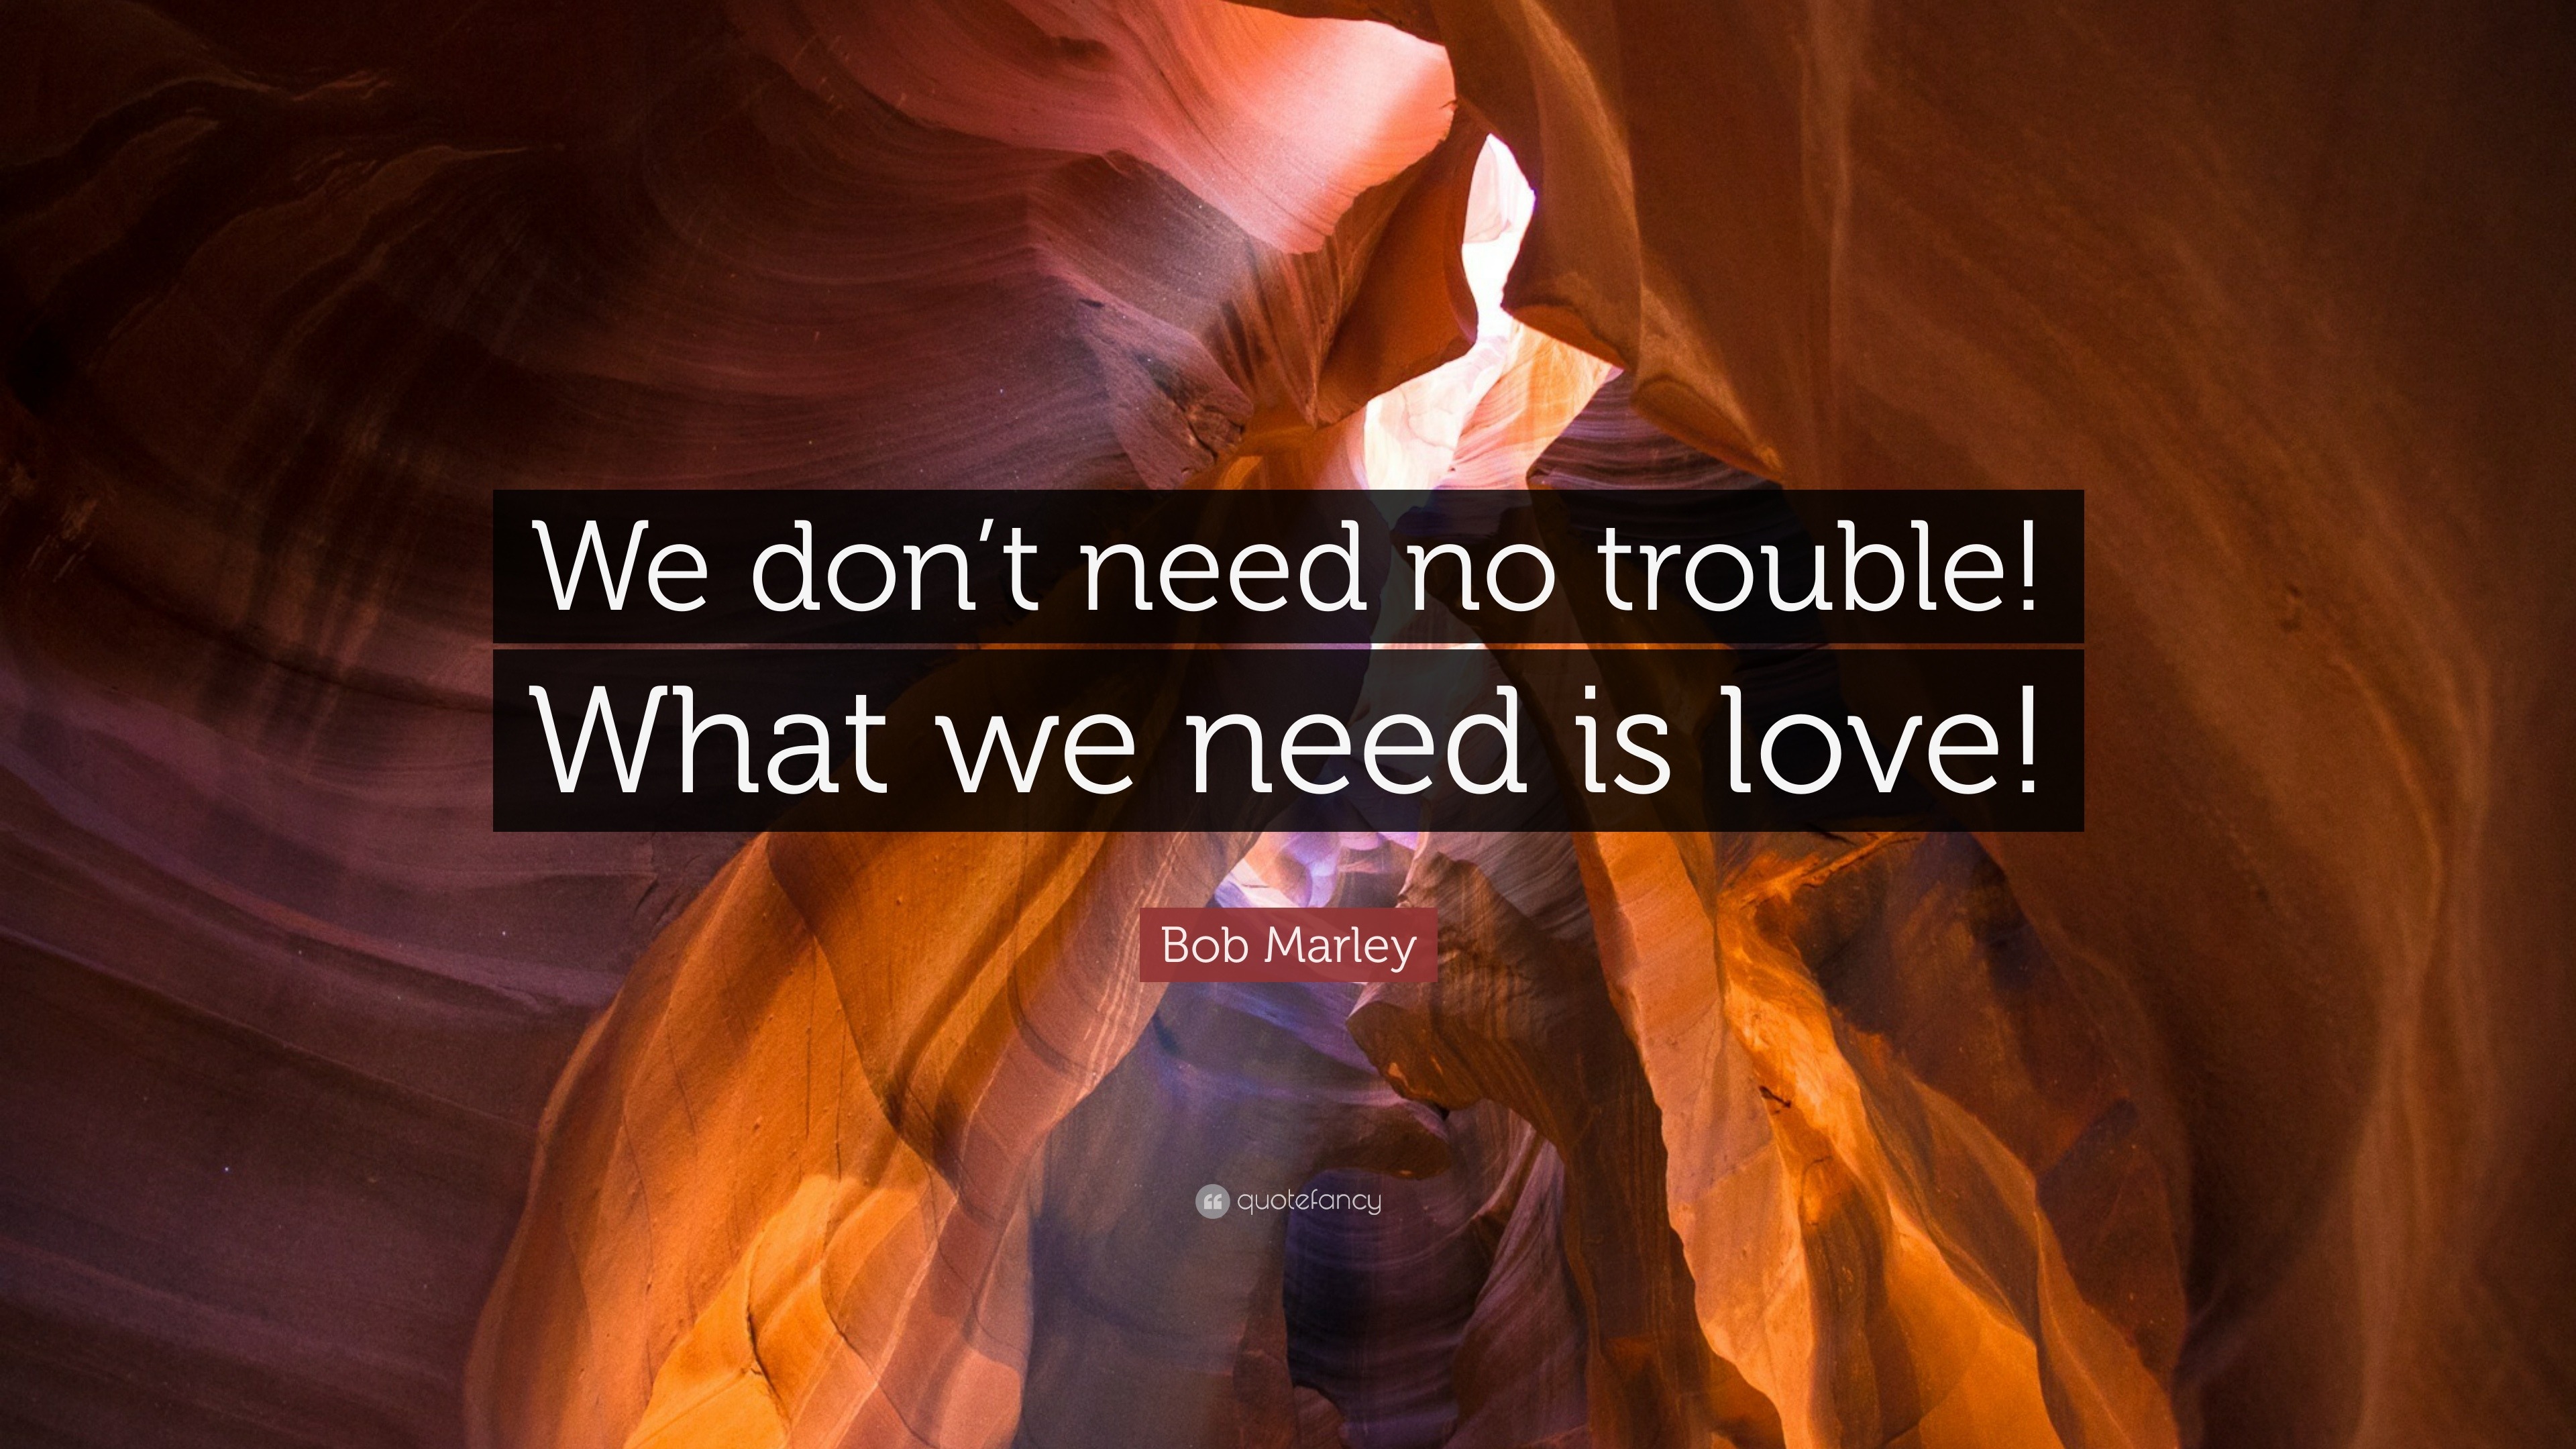 Bob Marley Quote: “We don’t need no trouble! What we need is love!”